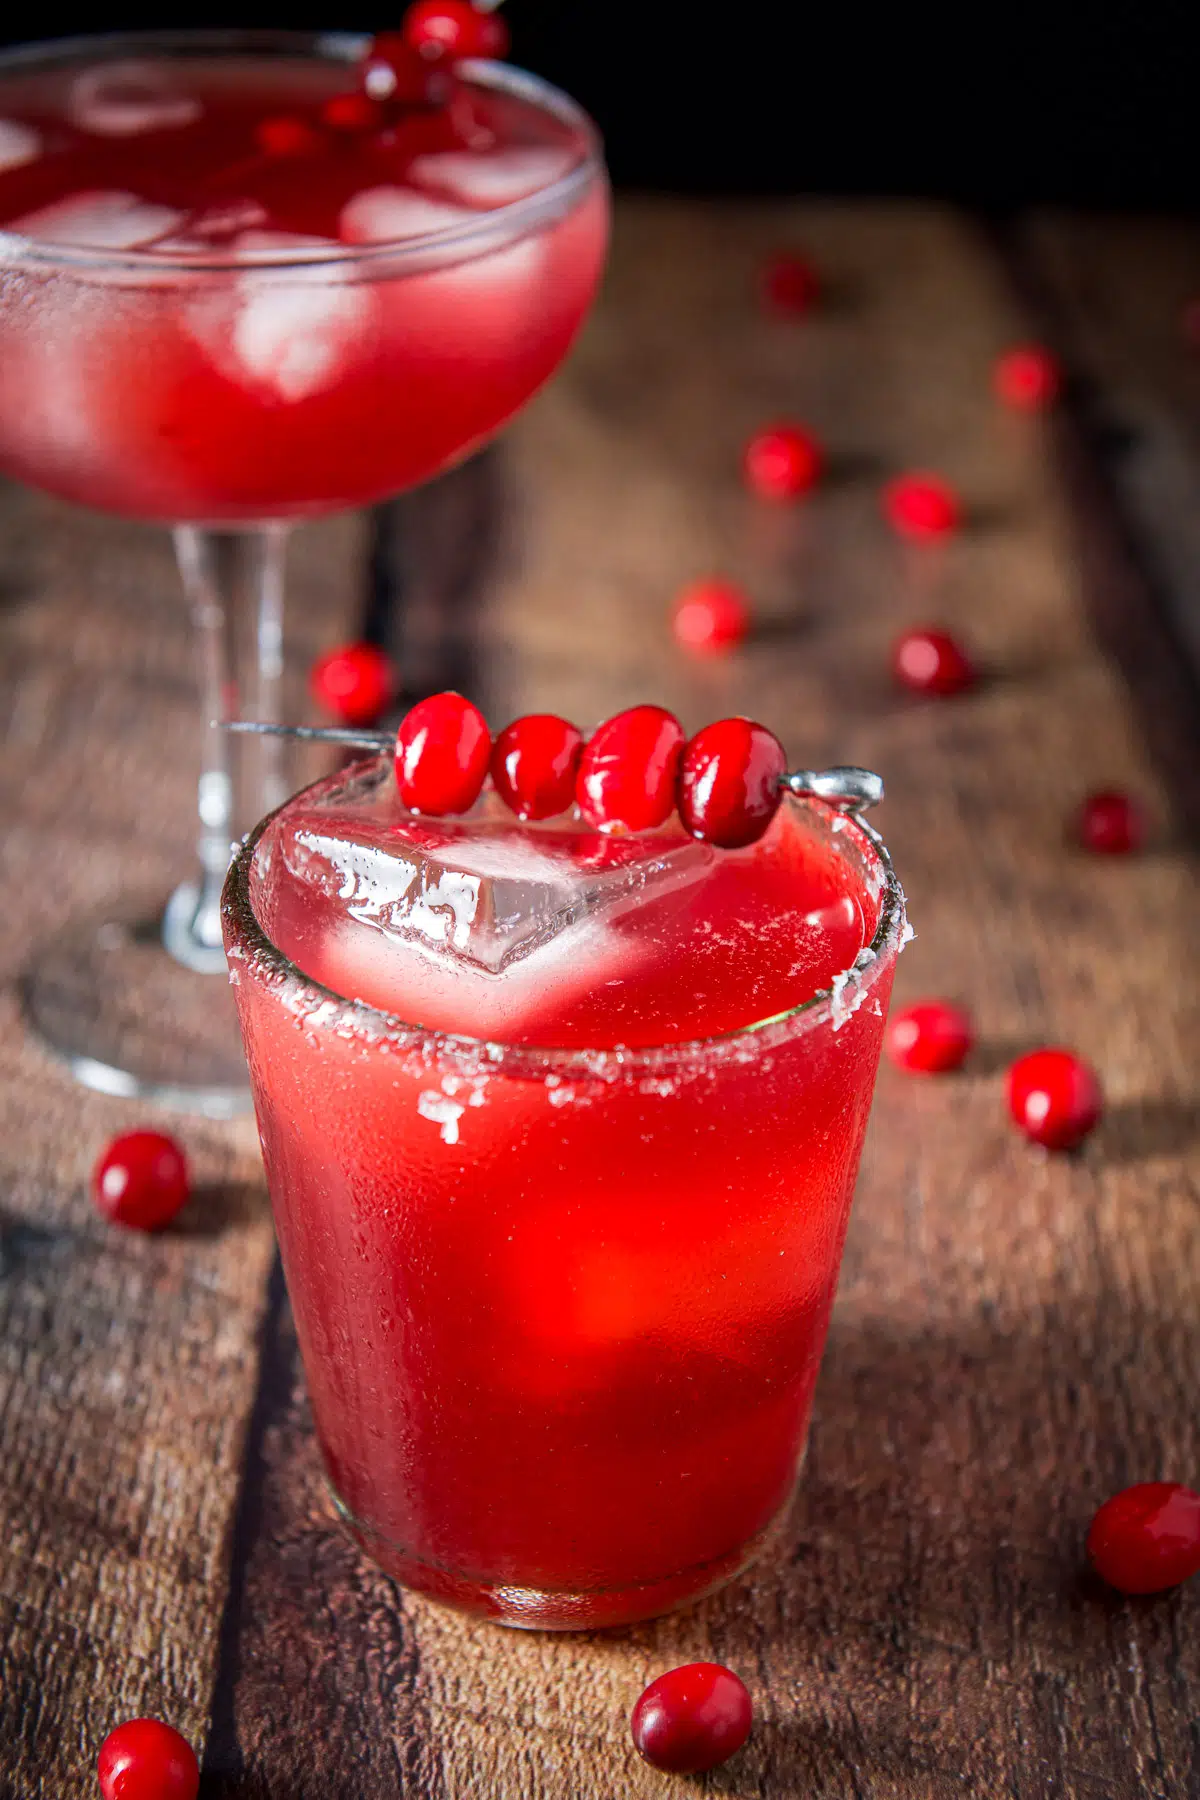 Close up of the cranberry cocktail with a spear of cranberries as garnish and the bowl glass in the background